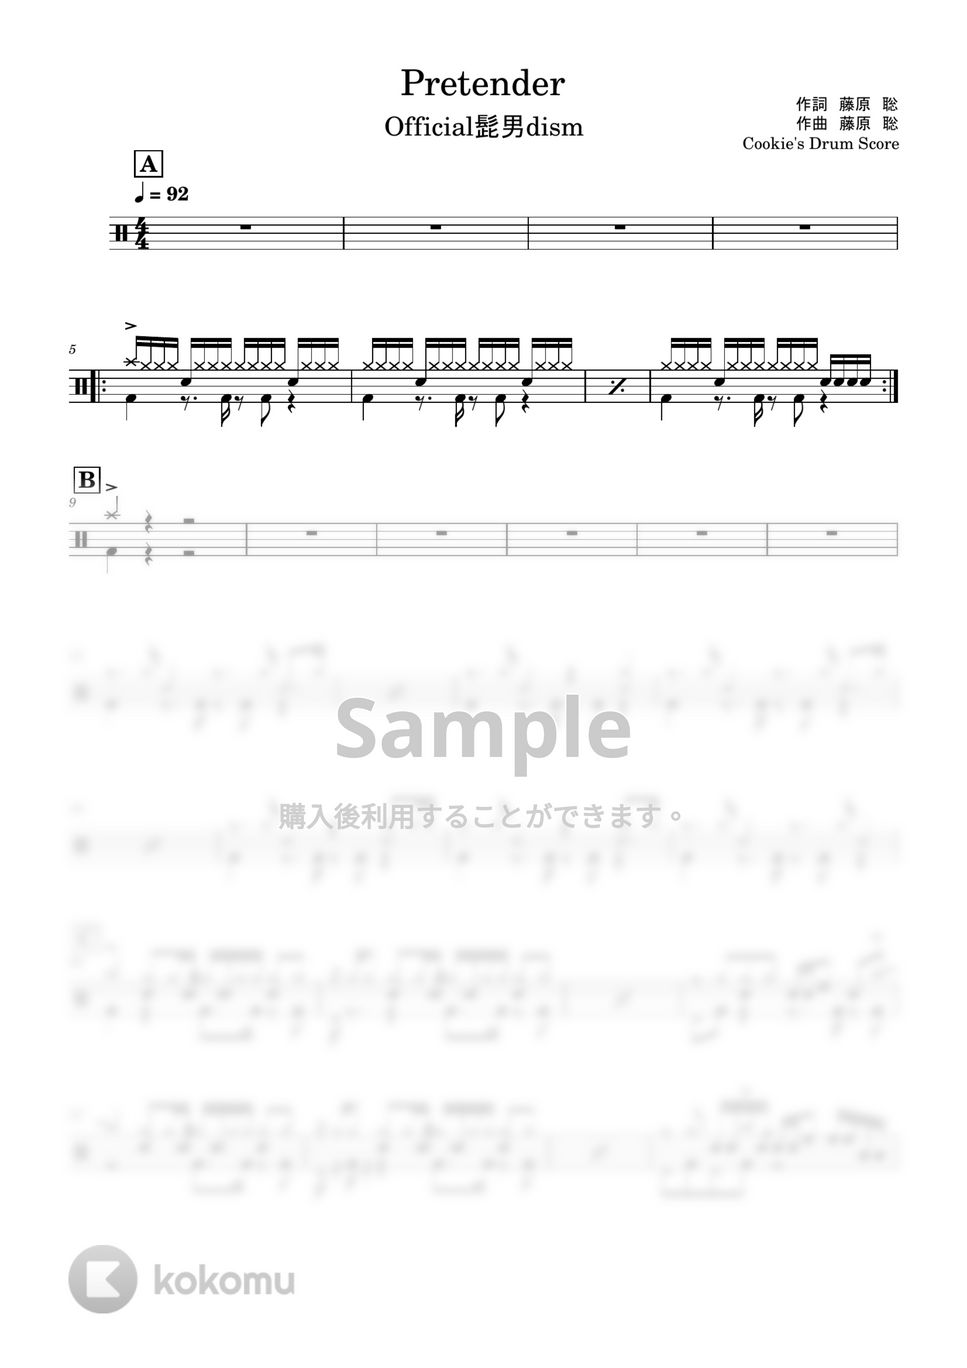 Official髭男dism - Pretender by Cookie's Drum Score